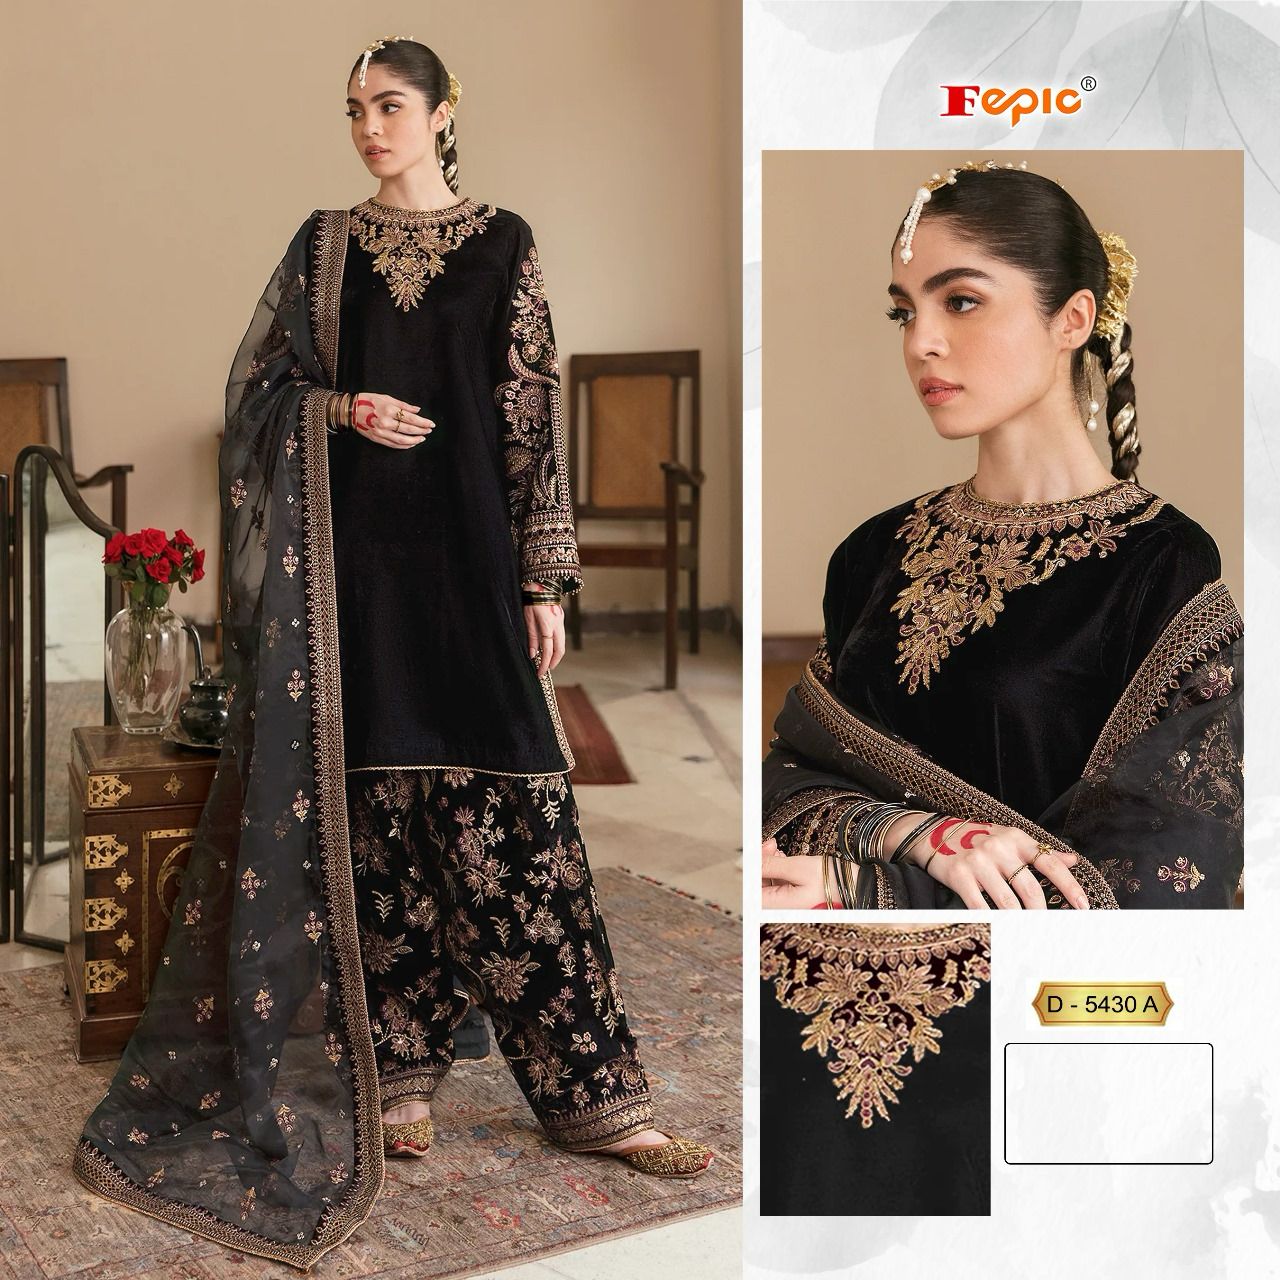 FEPIC D 5430 A ROSEMEEN PAKISTANI SUITS IN INDIA